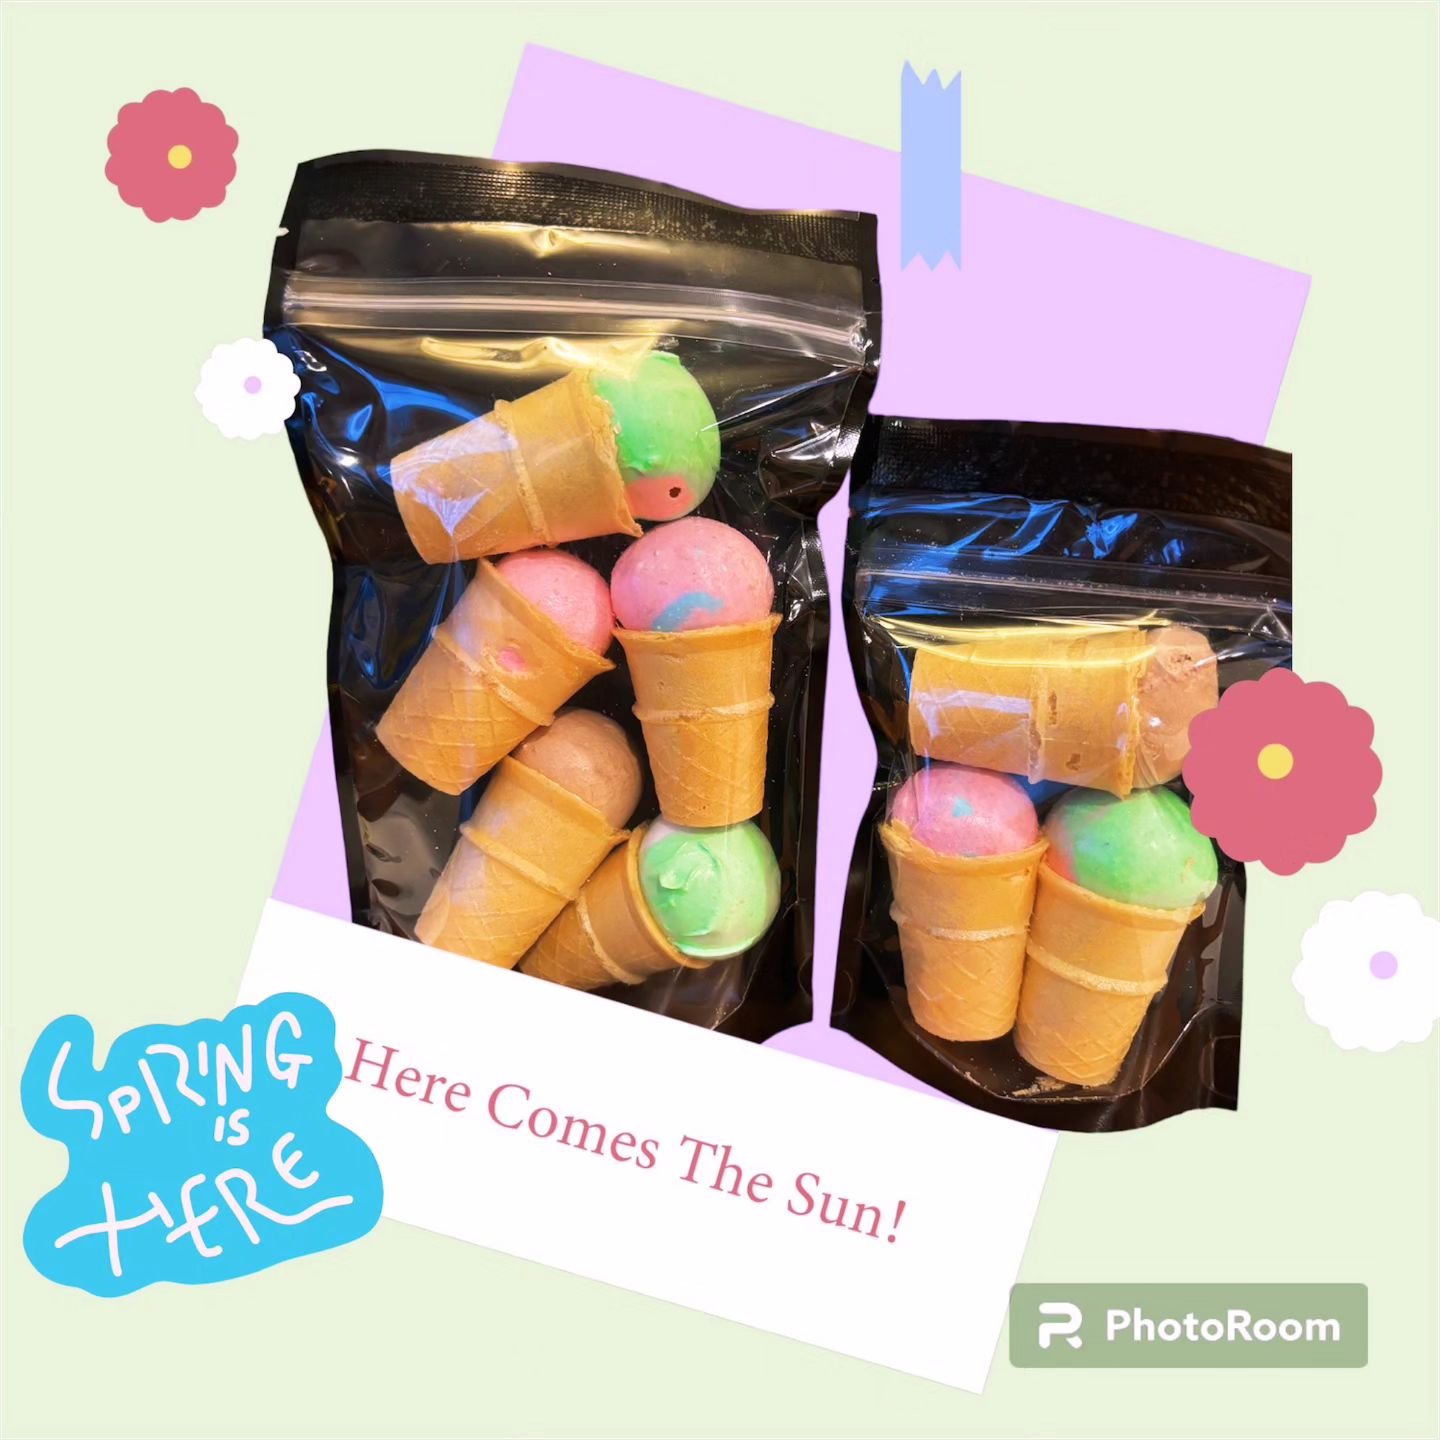 New Freeze Dried Product Alert! Freezy Cones!! These mini ice cream cones are topped with a piece ff freeze dried taffy. They have all of the taste with none of the mess of real ice cream cones. Stop in today and grab a bag!